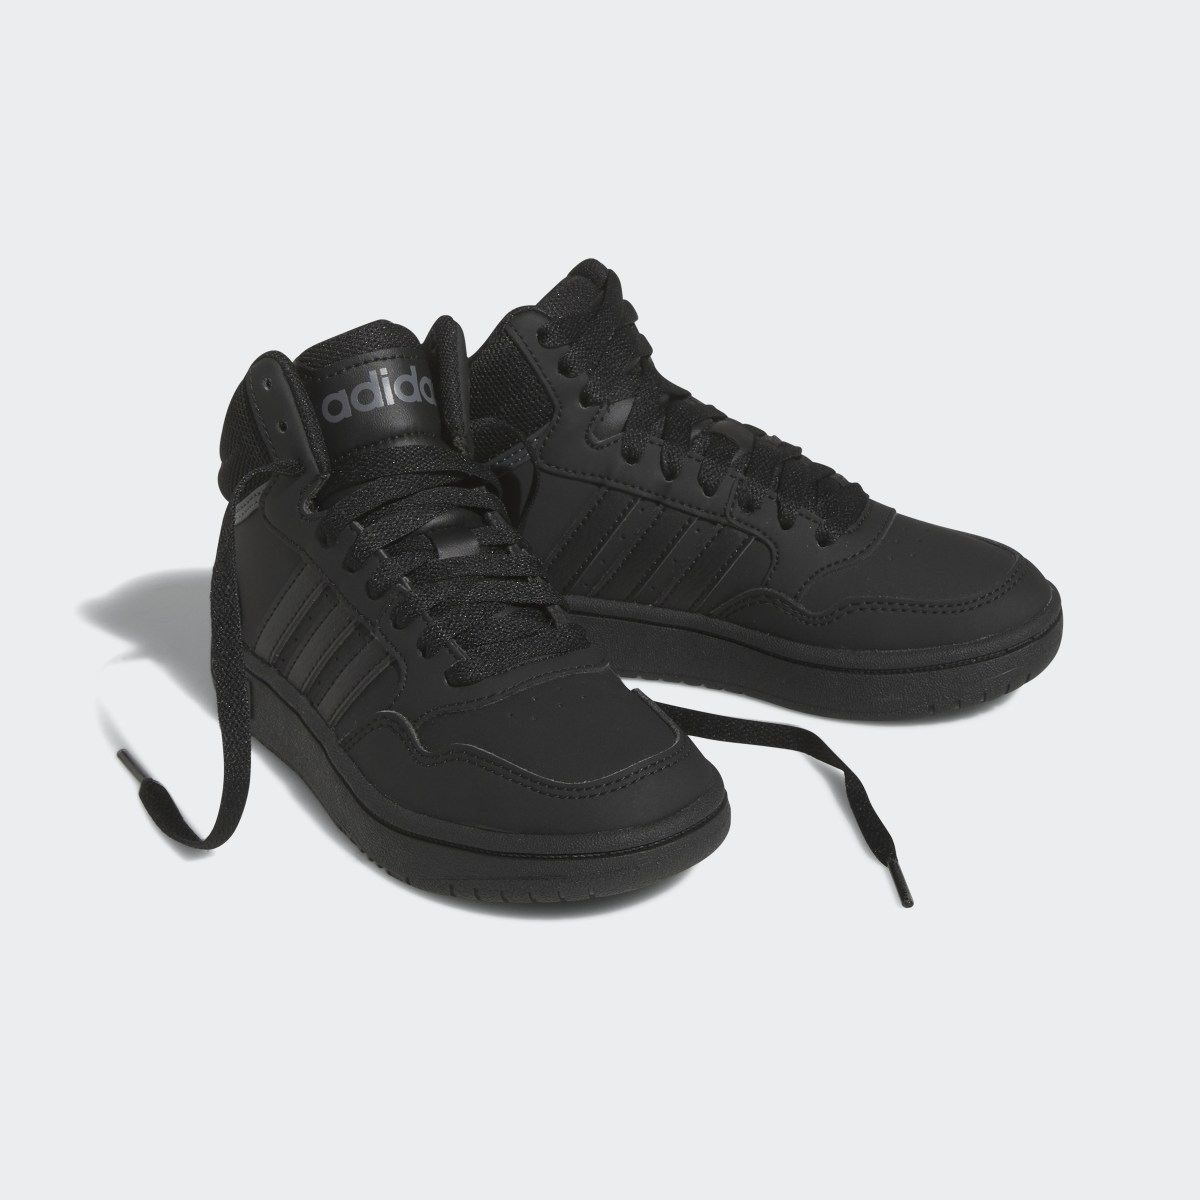 Adidas Hoops Mid Shoes. 5